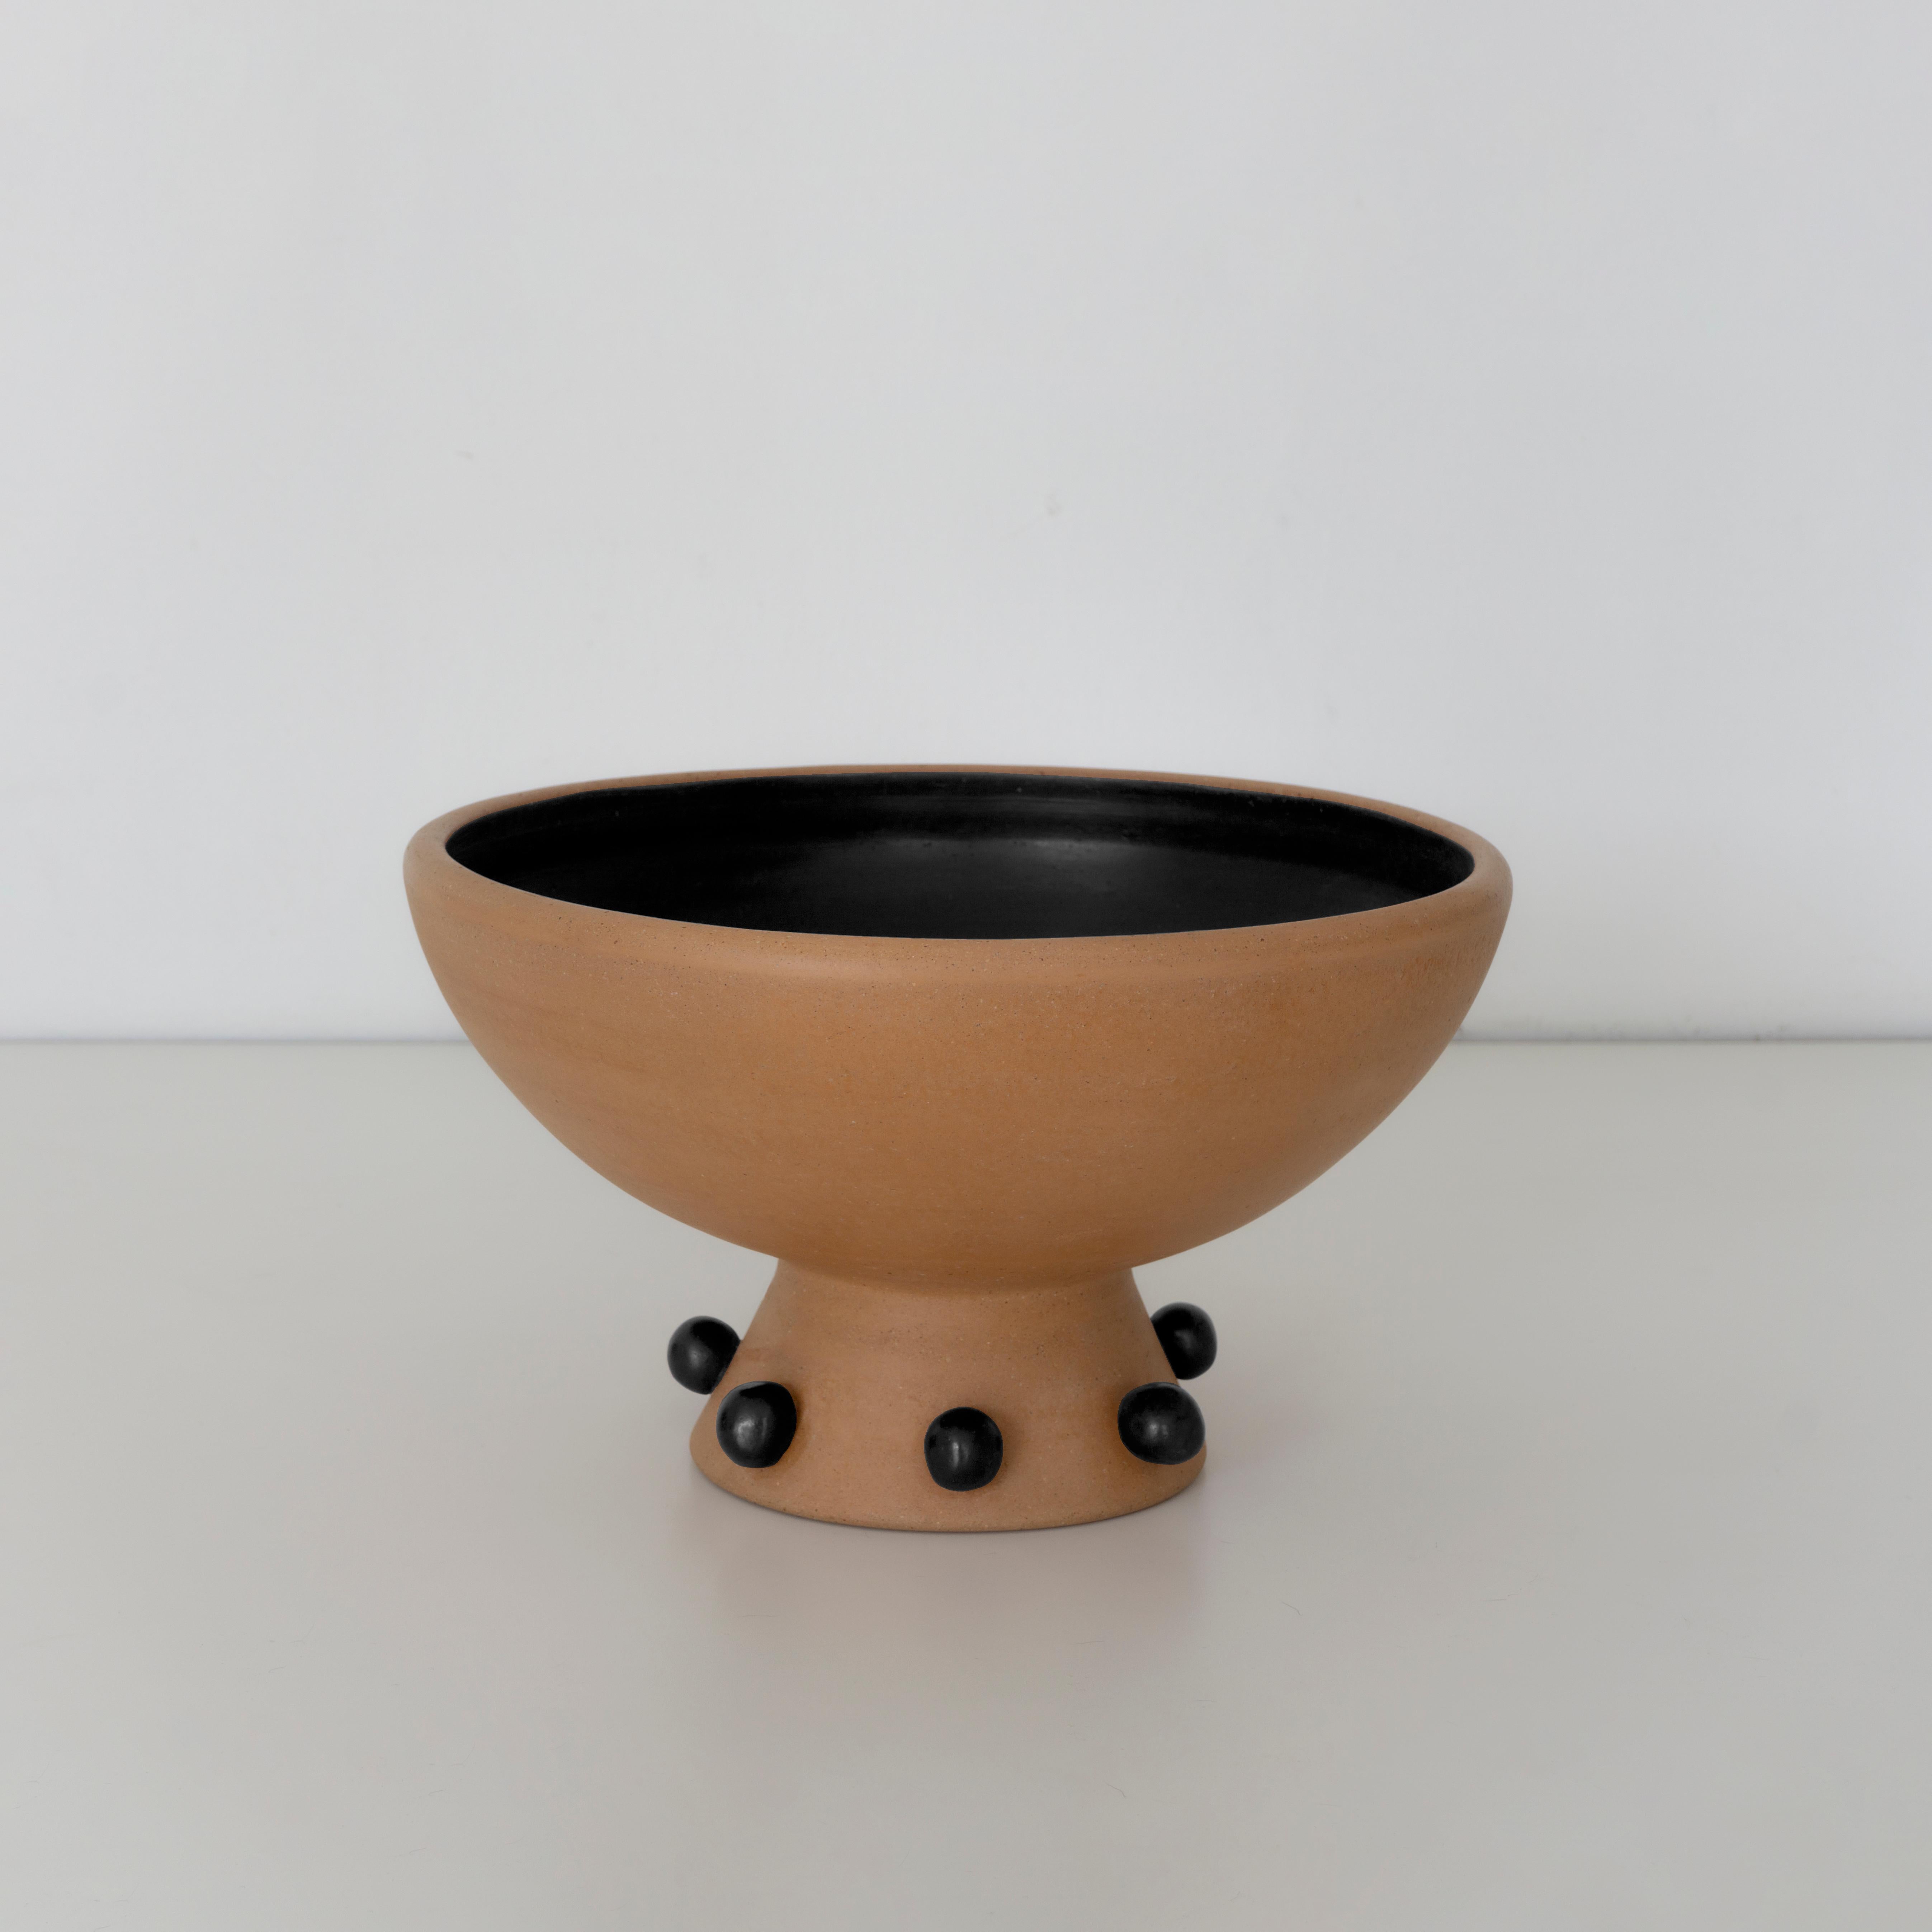 Turned Decorative Clay Bowl/Vase Danzante 01. Smooth Soft Clay Finish. By Raíz Mx For Sale